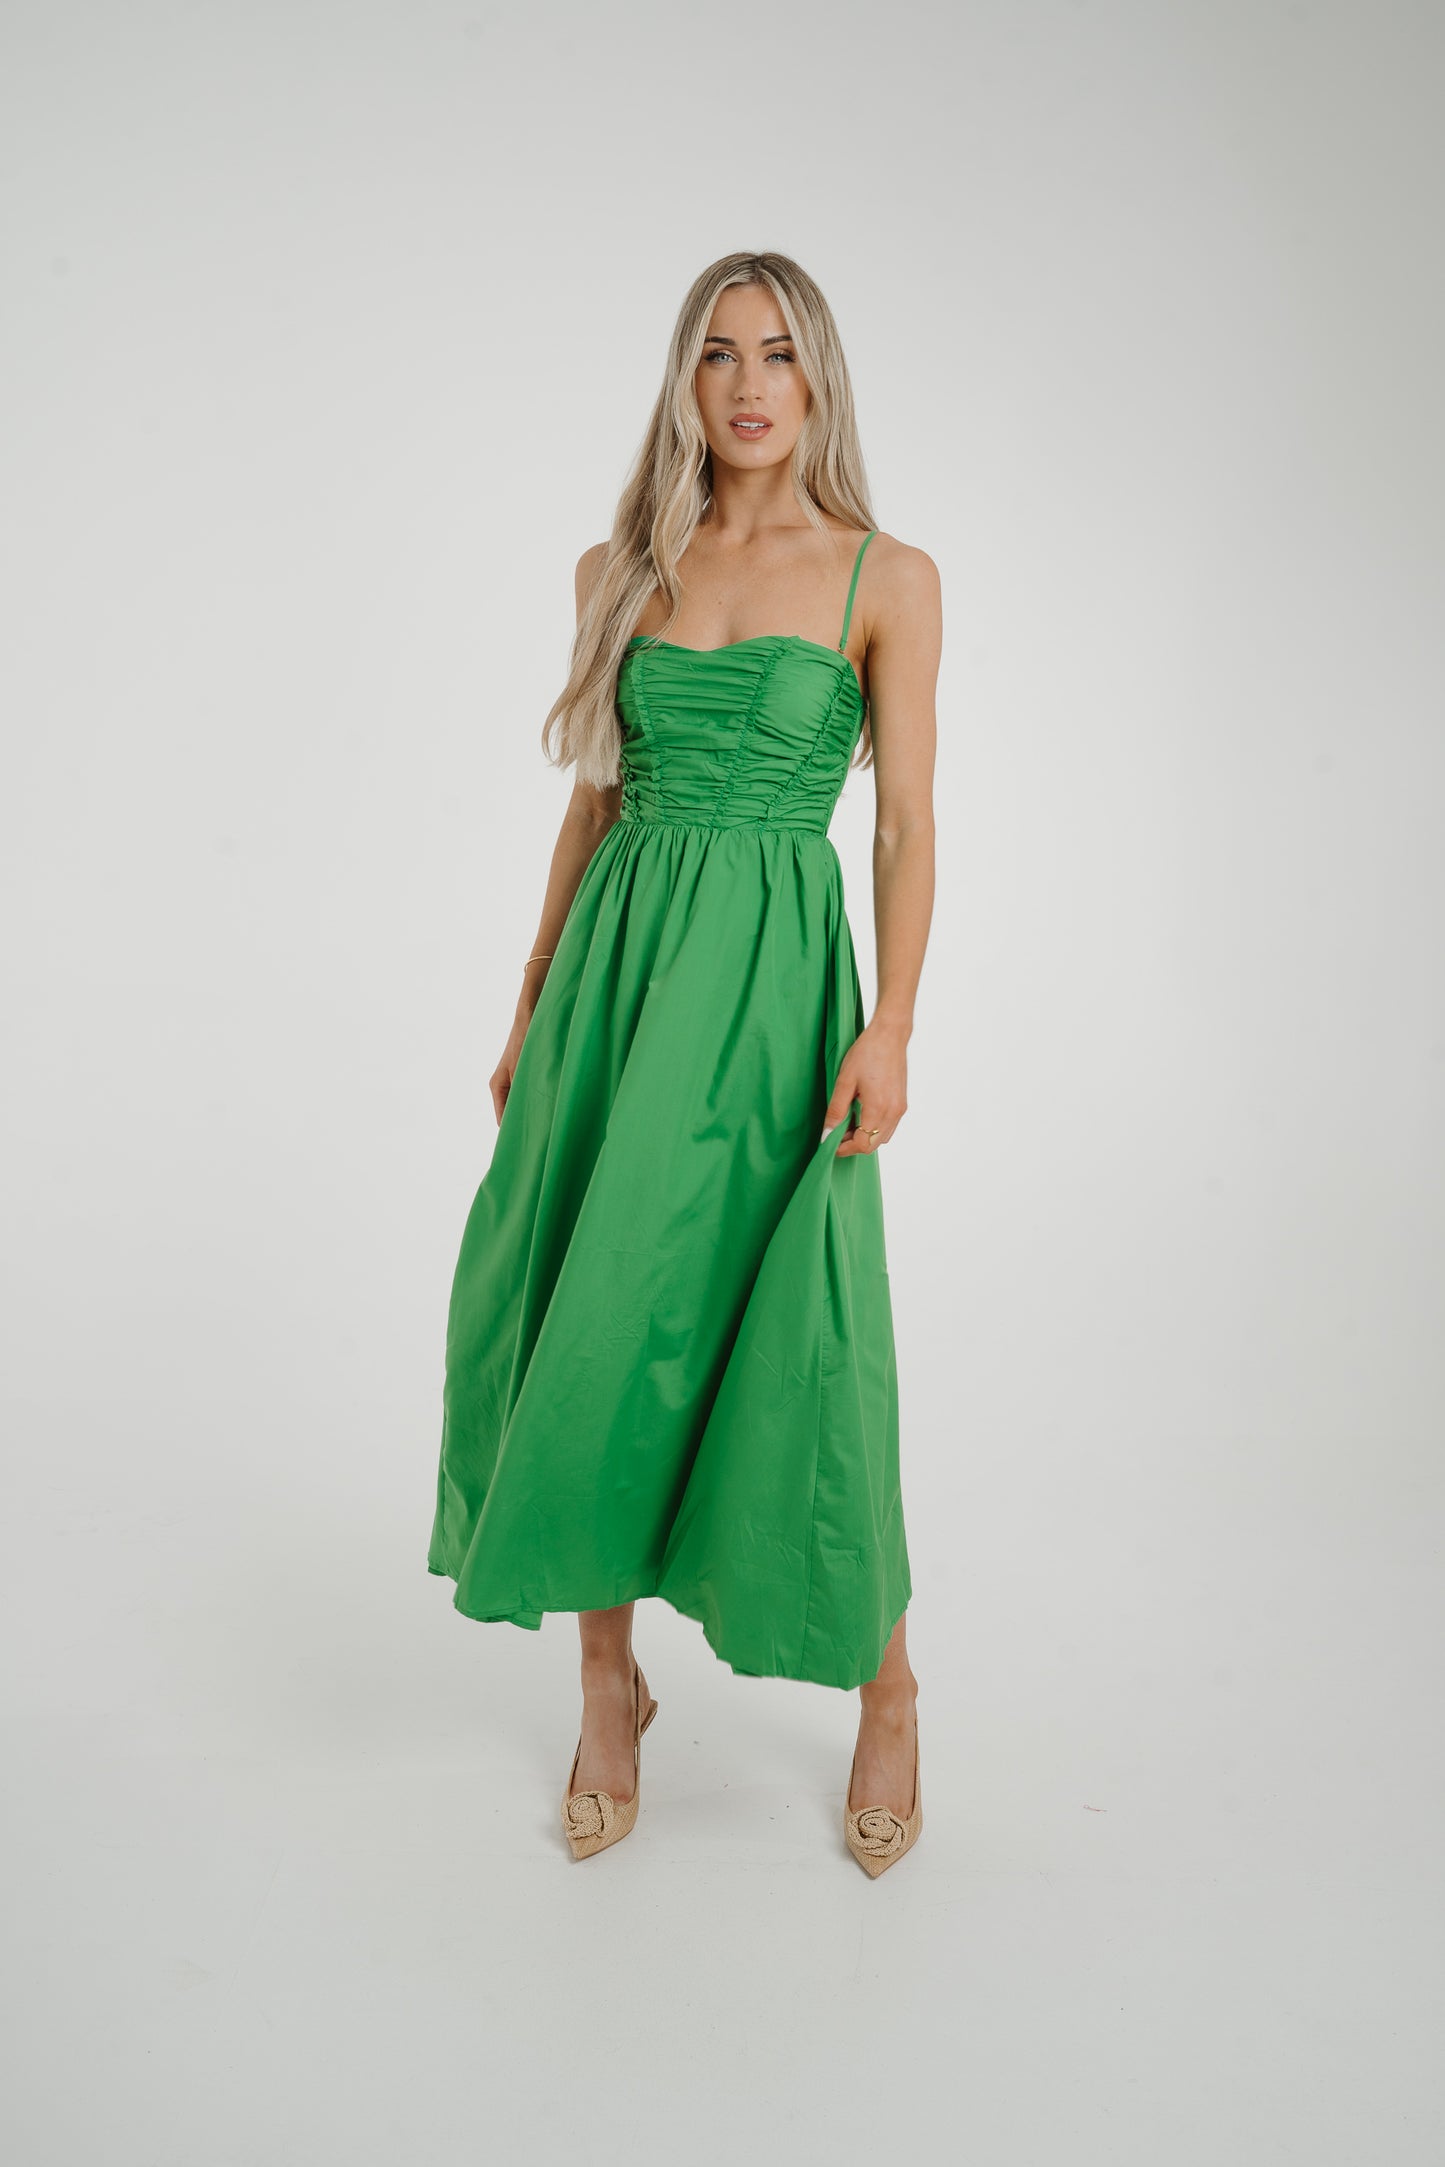 Caitlyn Corset Style Dress In Green